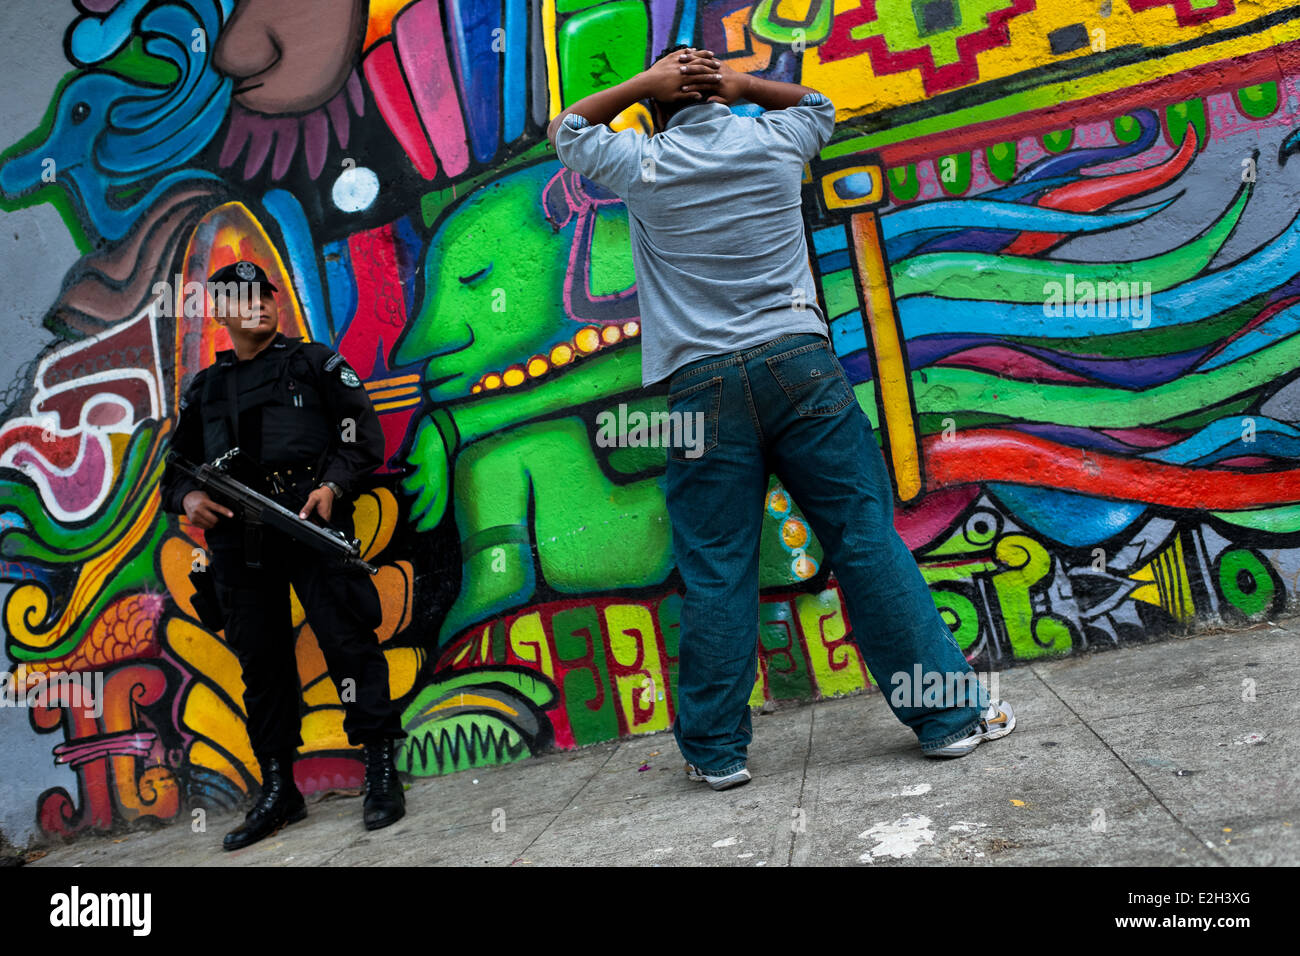 An alleged gang member is controlled by a policeman from the special emergency unit on the street in San Salvador, El Salvador. Stock Photo